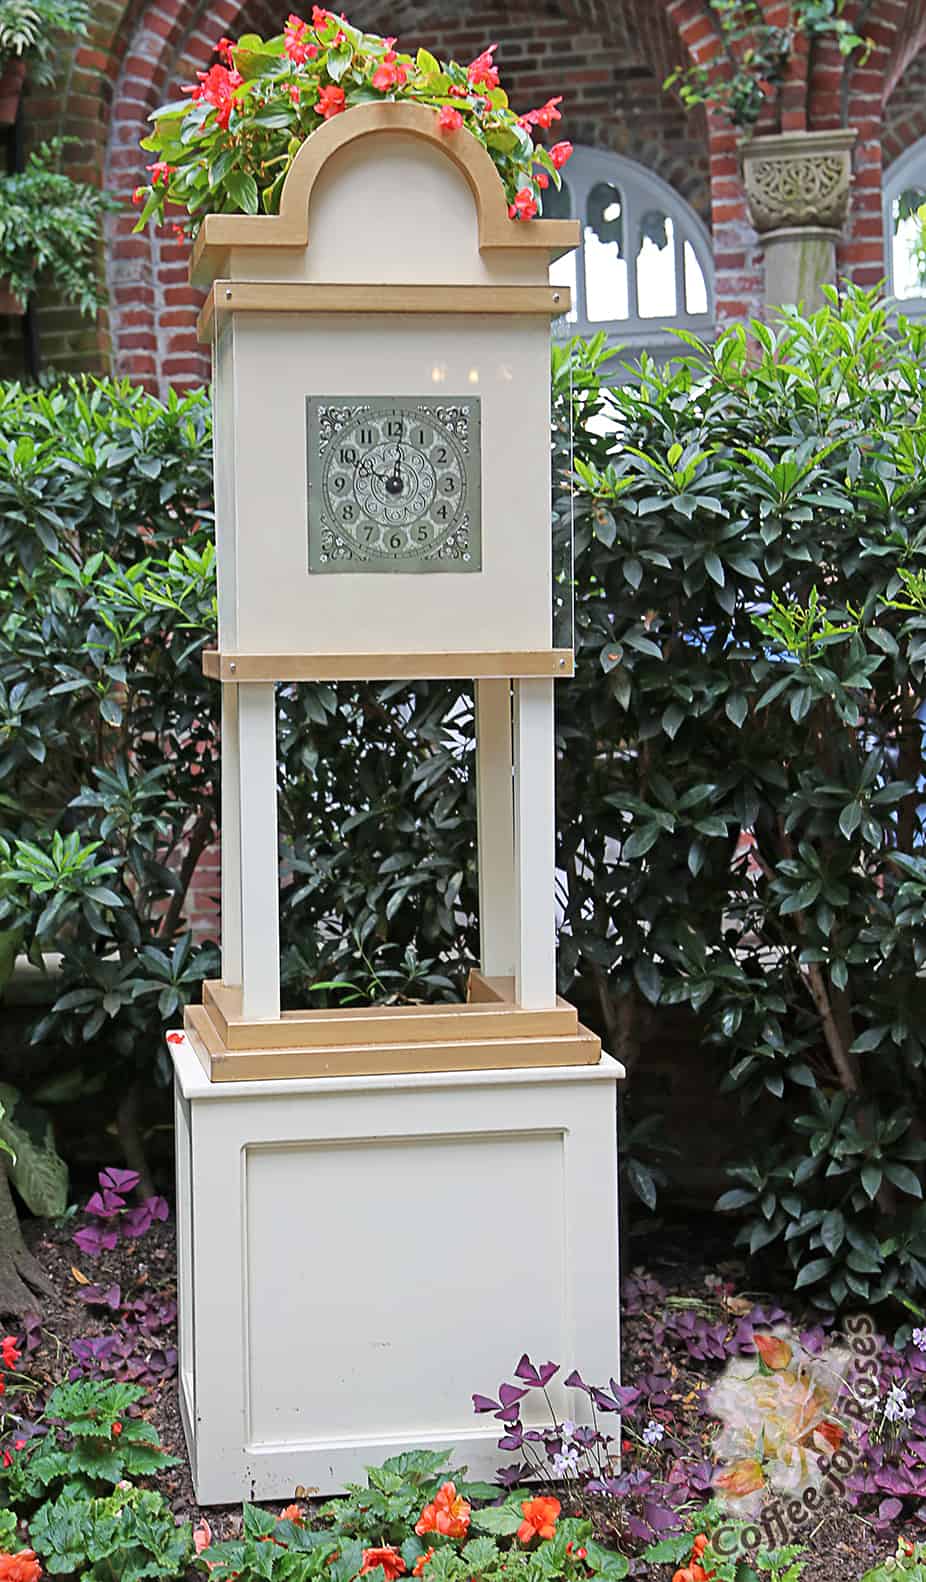 This clock planter at the Phipps Conservatory and Botanical Gardens in Pittsburgh, PA is another example of thinking outside the pot. Manmade structures like this provide a good contrast to the textures of foliage, and this one does triple duty as an upright element, planter and focal point structure.